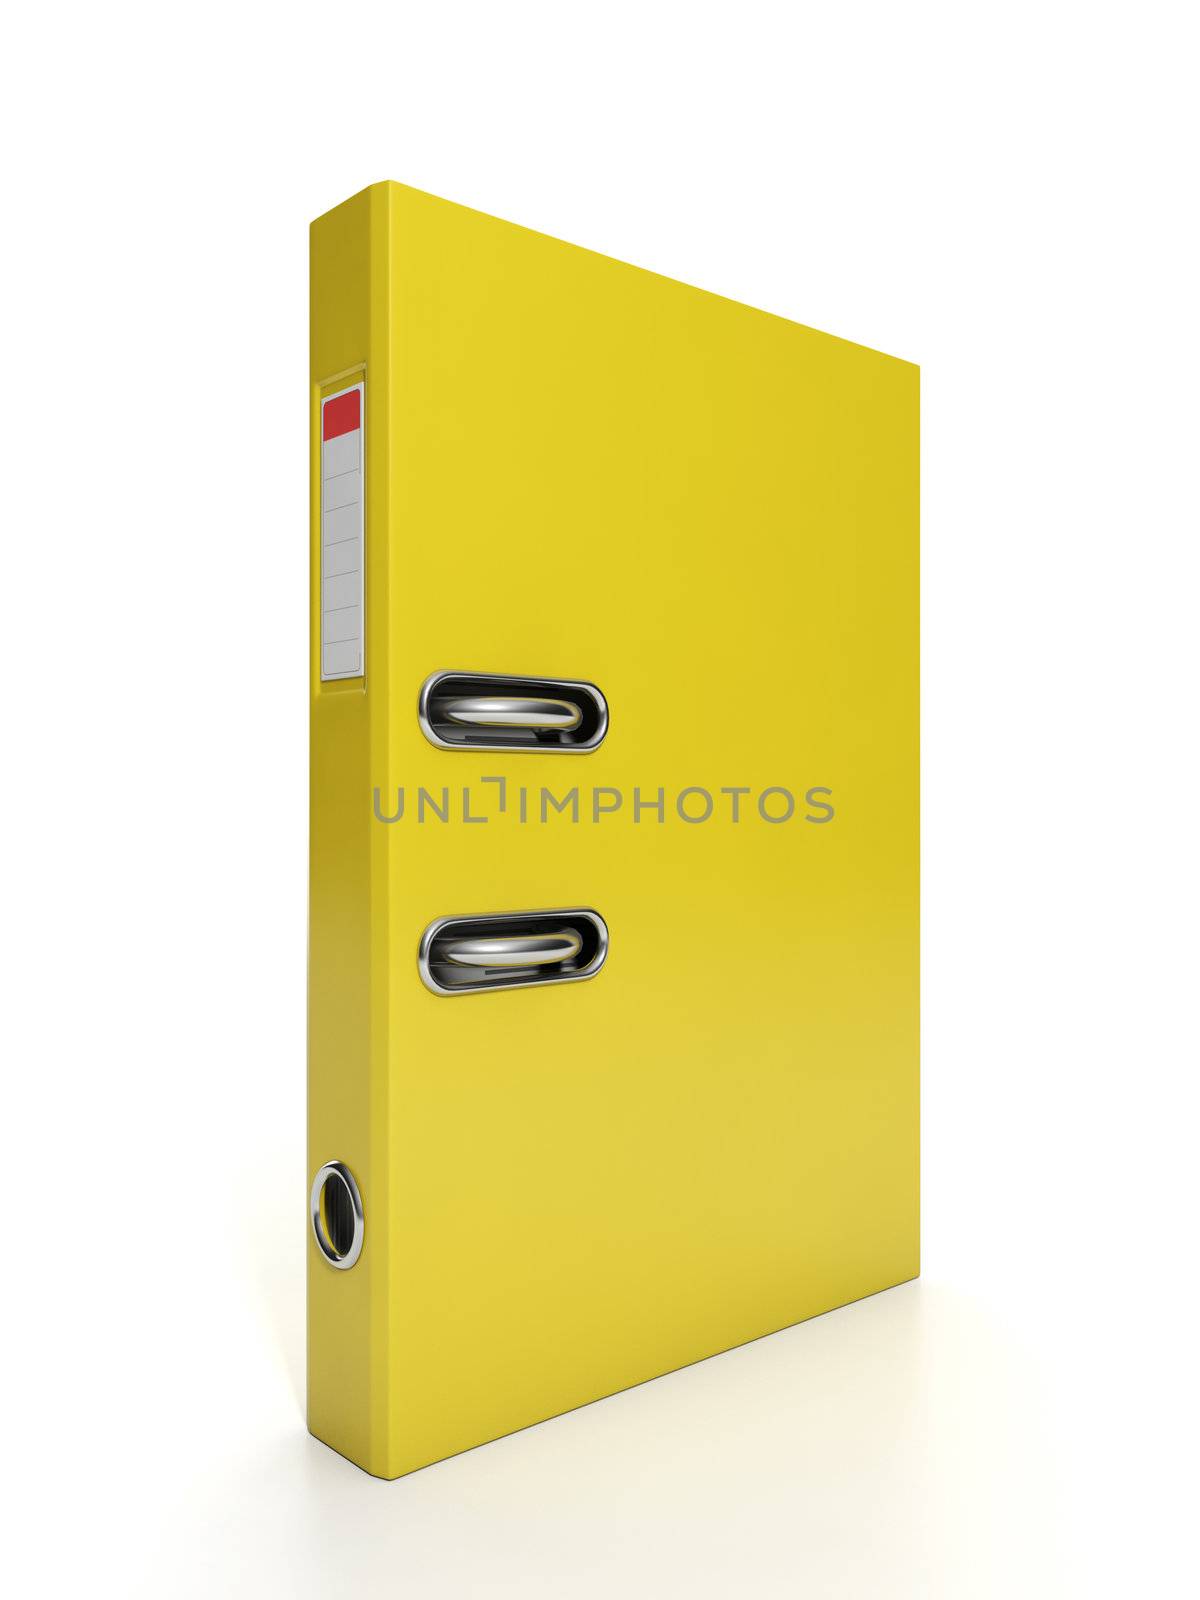 3d Illustration: Business objects. Yellow folder to a close-up